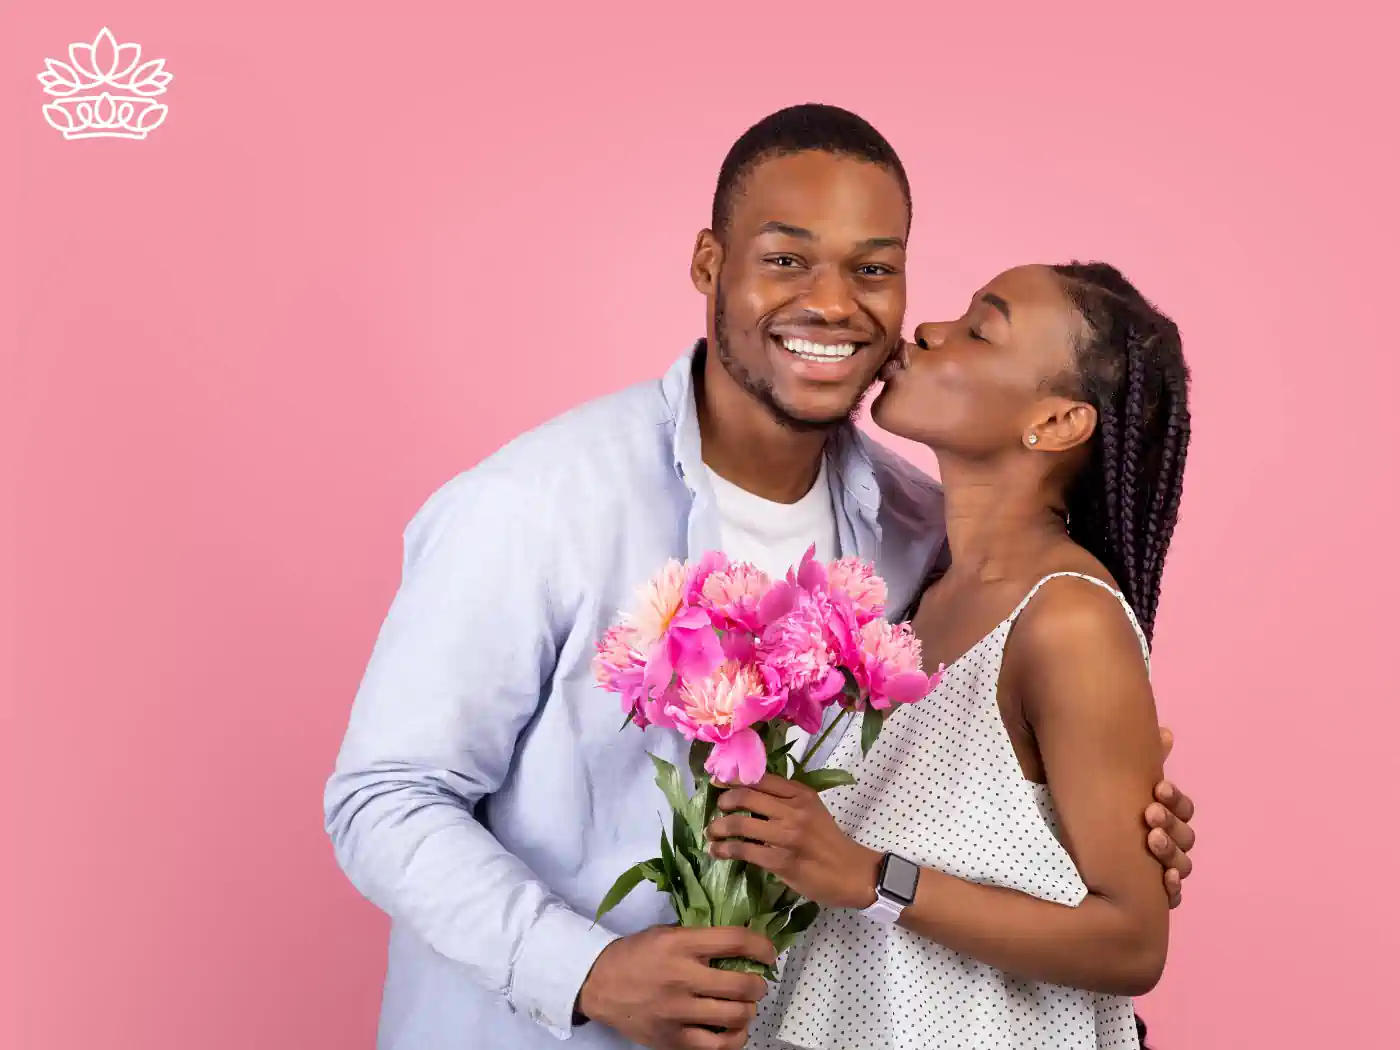 A woman kisses her partner on the cheek as he smiles and holds a bouquet of pink peonies, set against a soft pink background. Fabulous Flowers and Gifts delivered with heart. Valentine's Day Flowers.